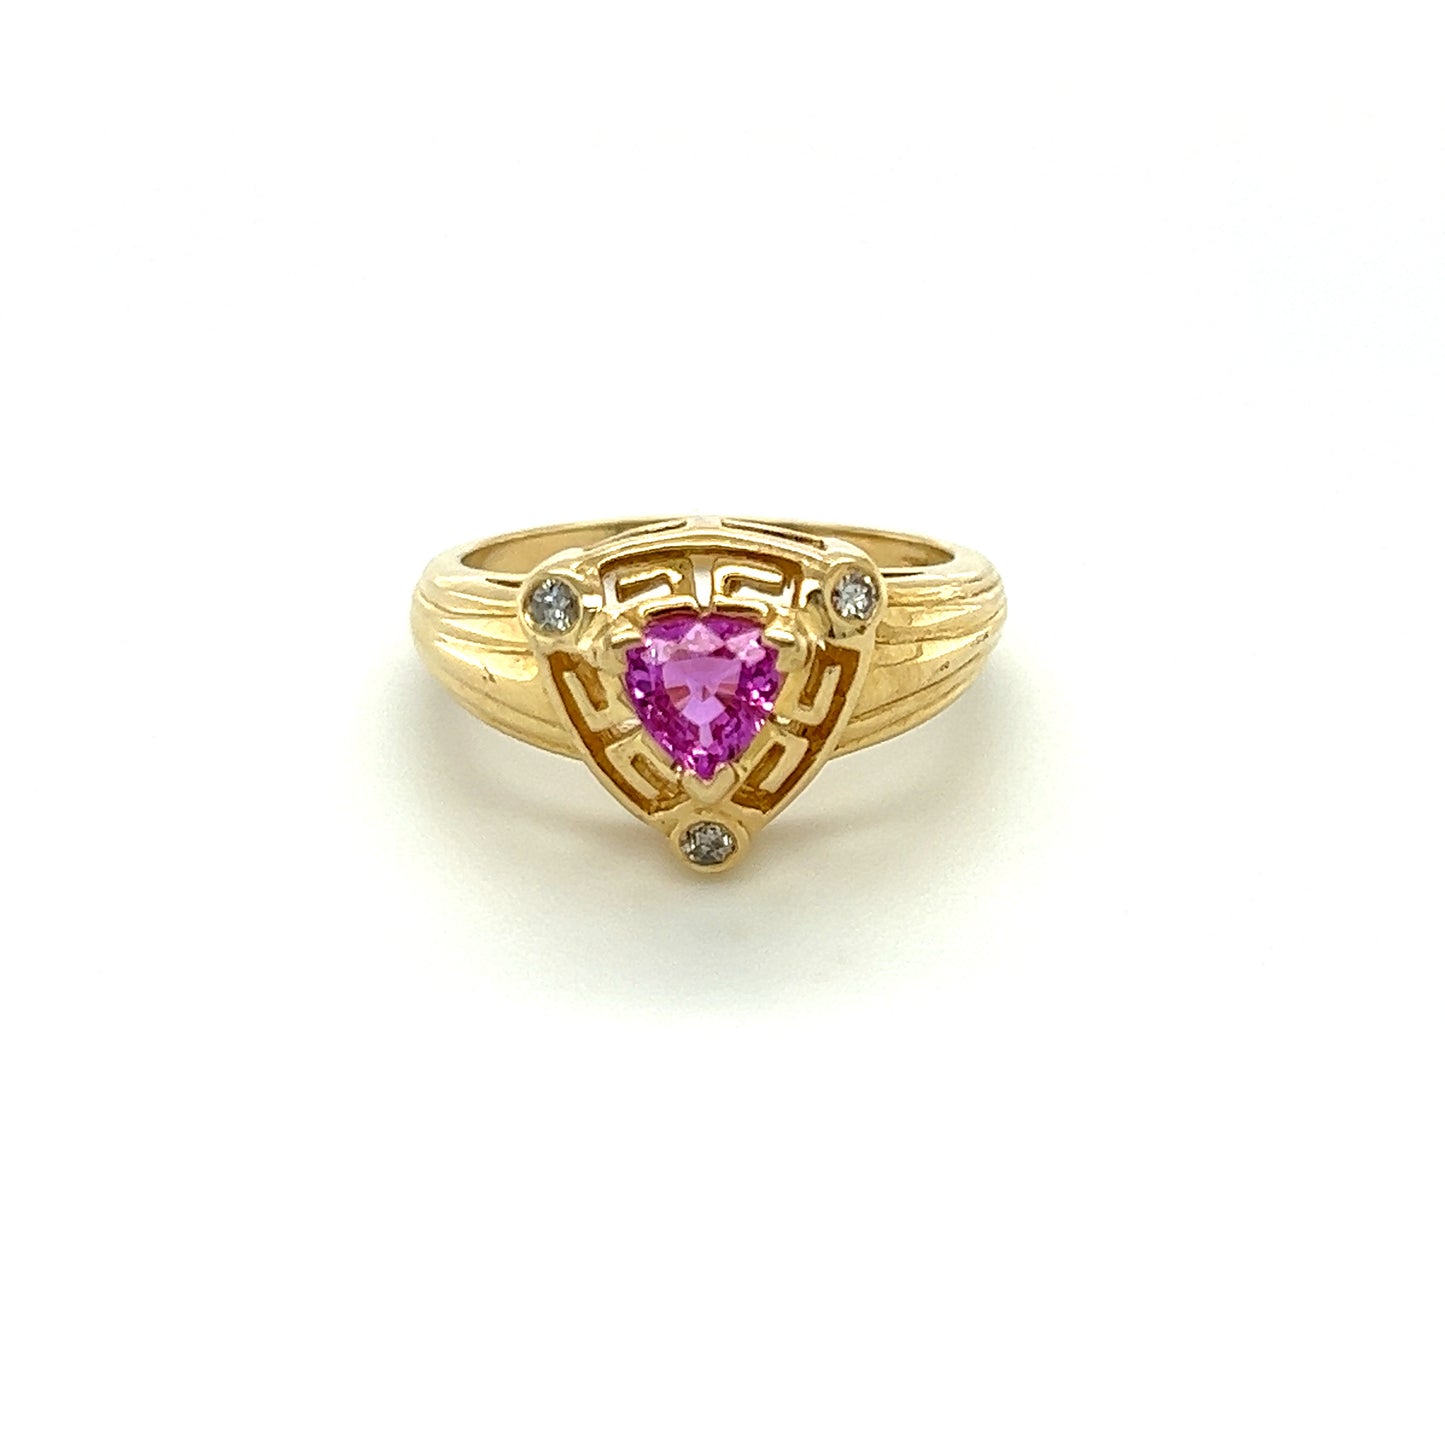 14K Yellow Gold Lady's Diamond and Pink Sapphire Ring